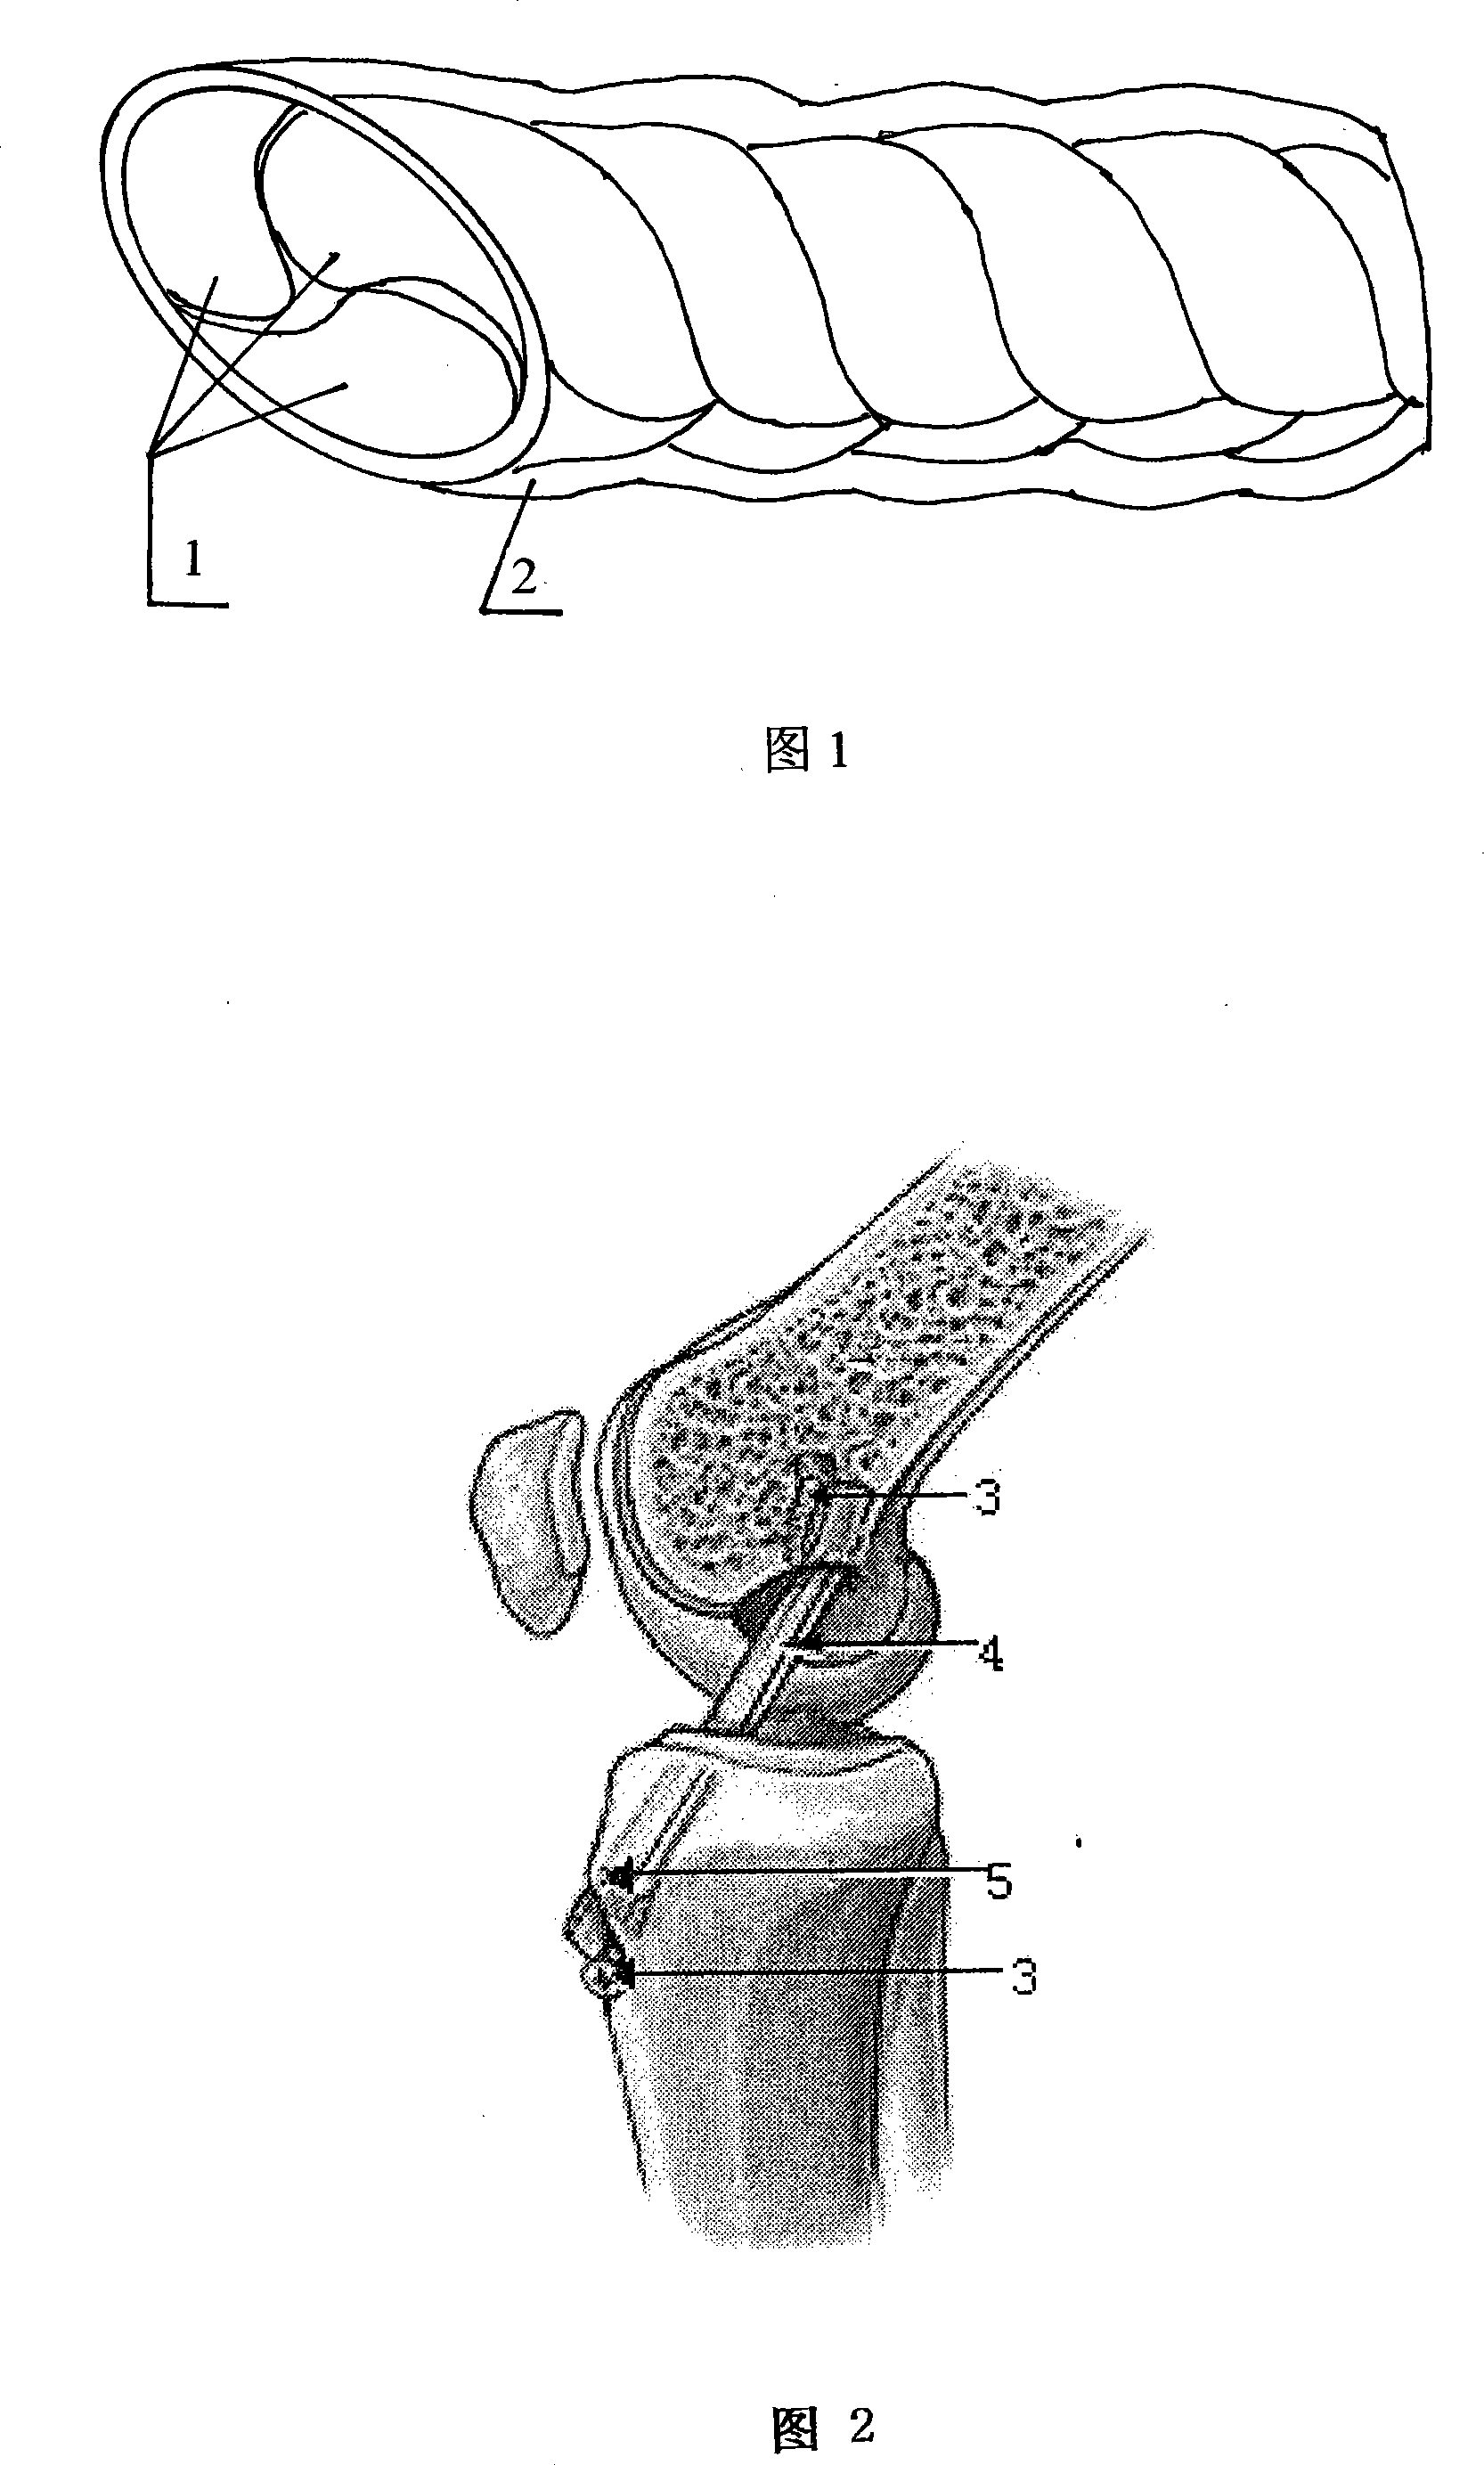 Method for preparing medical knee joint cruciate ligaments